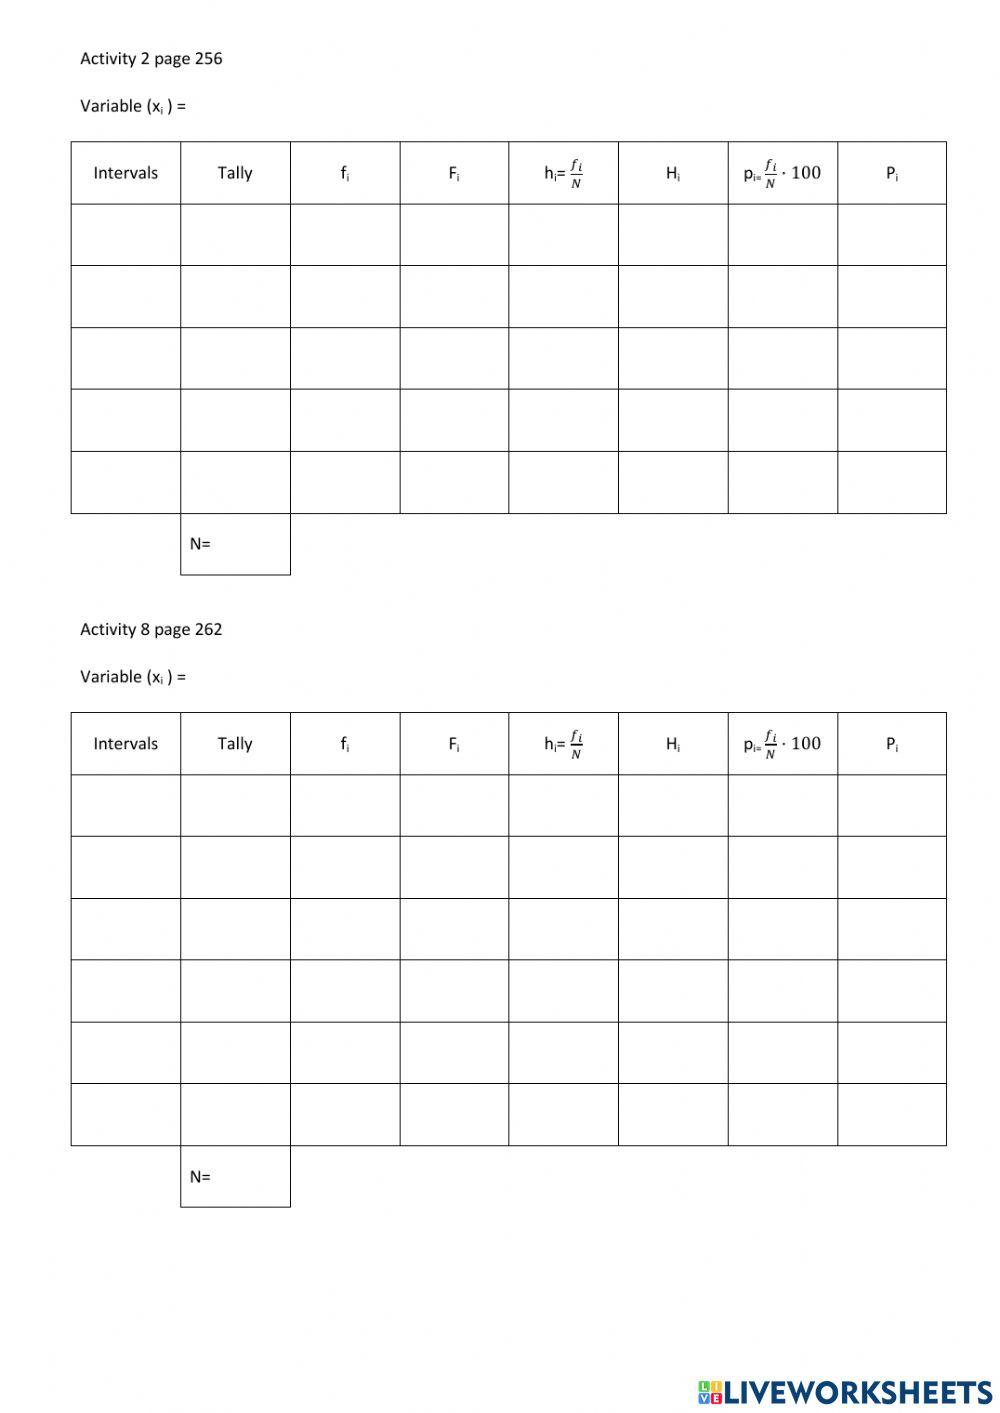 Frequency tables. Activities 2 p 256 8 p262